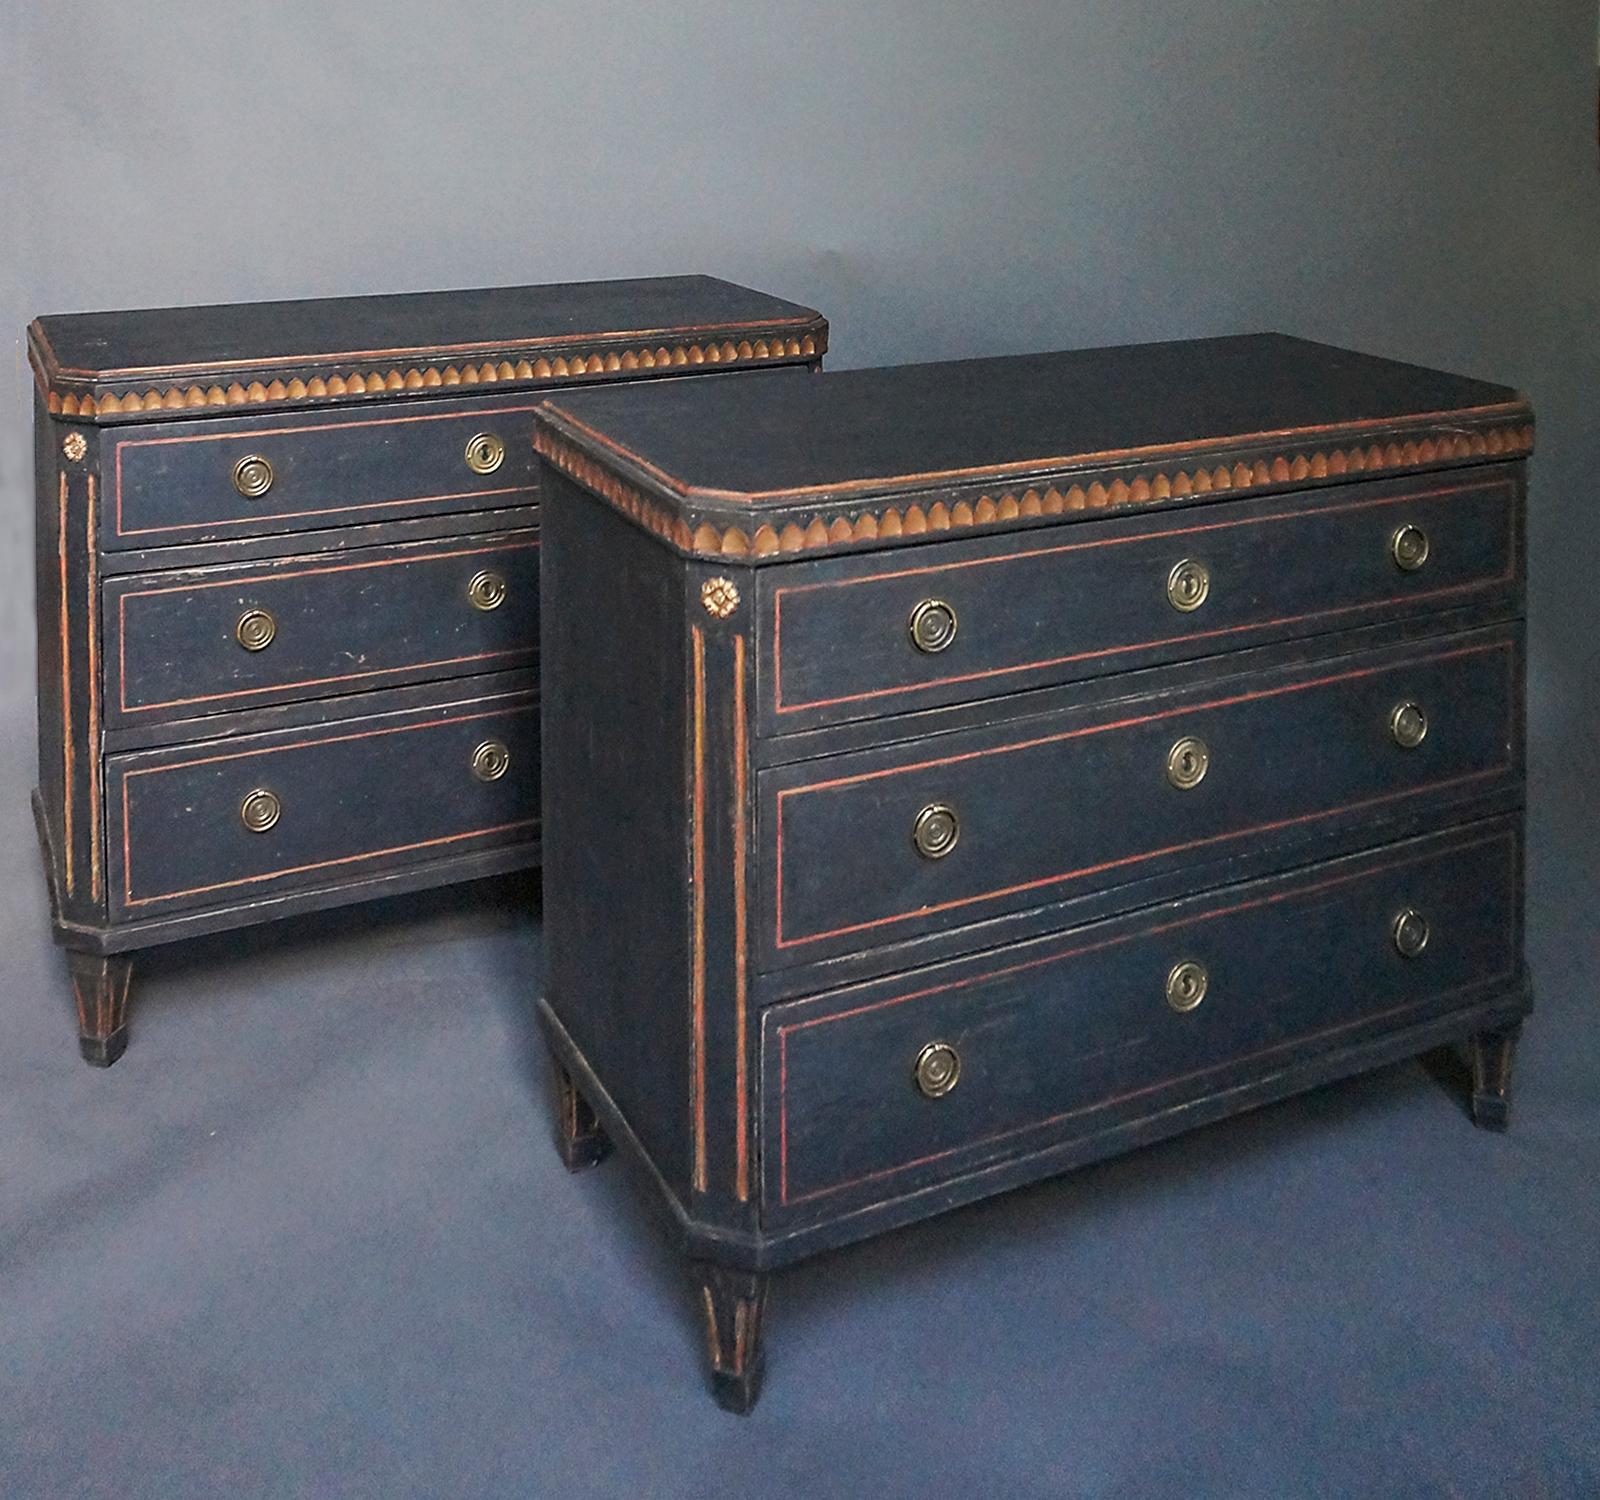 Pair of black three-drawer chests, Sweden circa 1880, in the Gustavian style. Shaped tops with lamb’s tongue molding, canted and reeded corner posts, and tapering, reeded feet. Brass pulls and escutcheons.